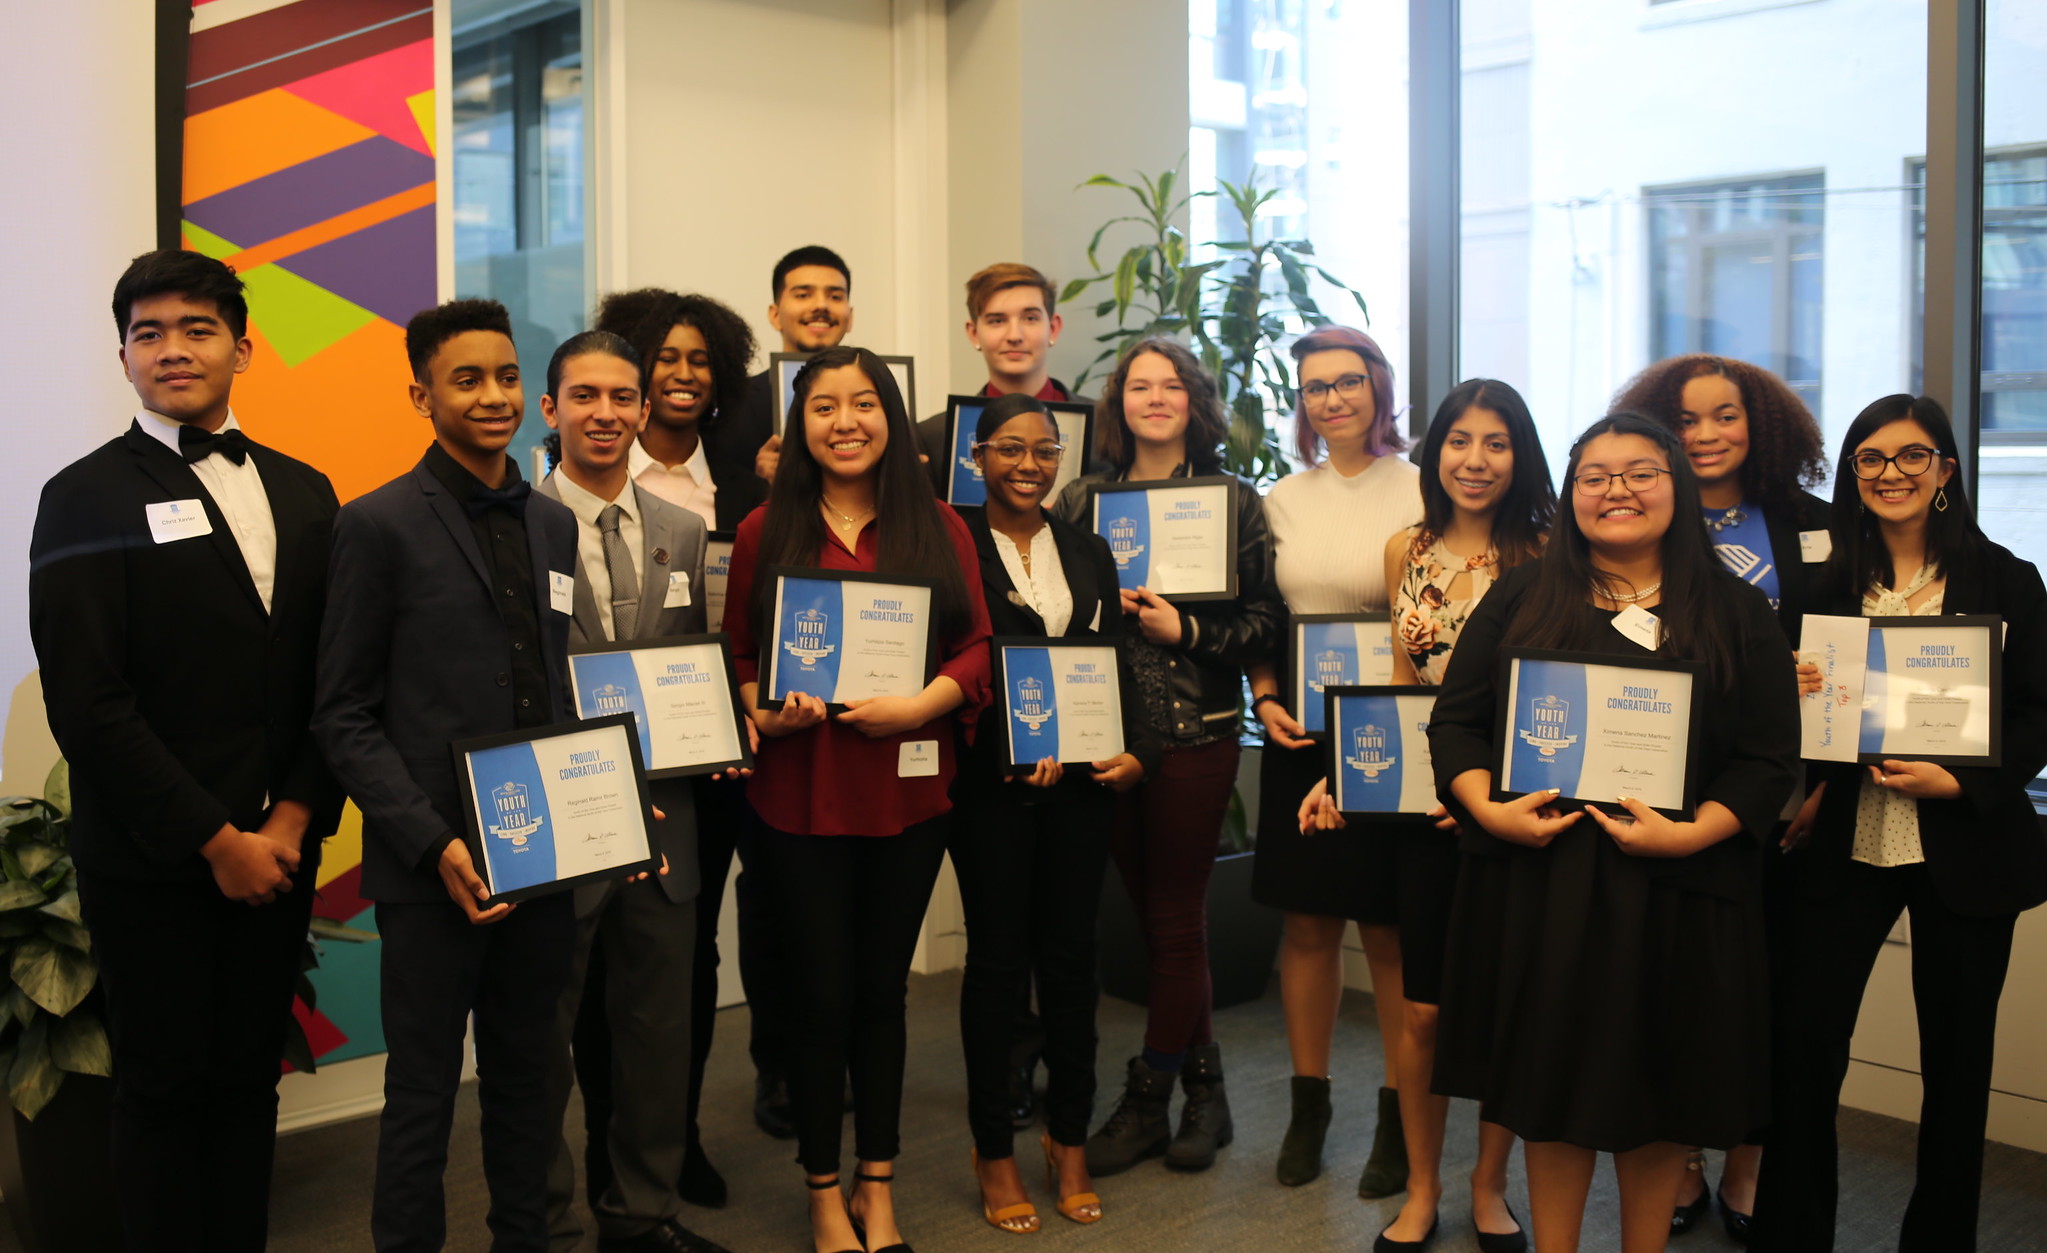 Fourteen people standing in a row holding certificates